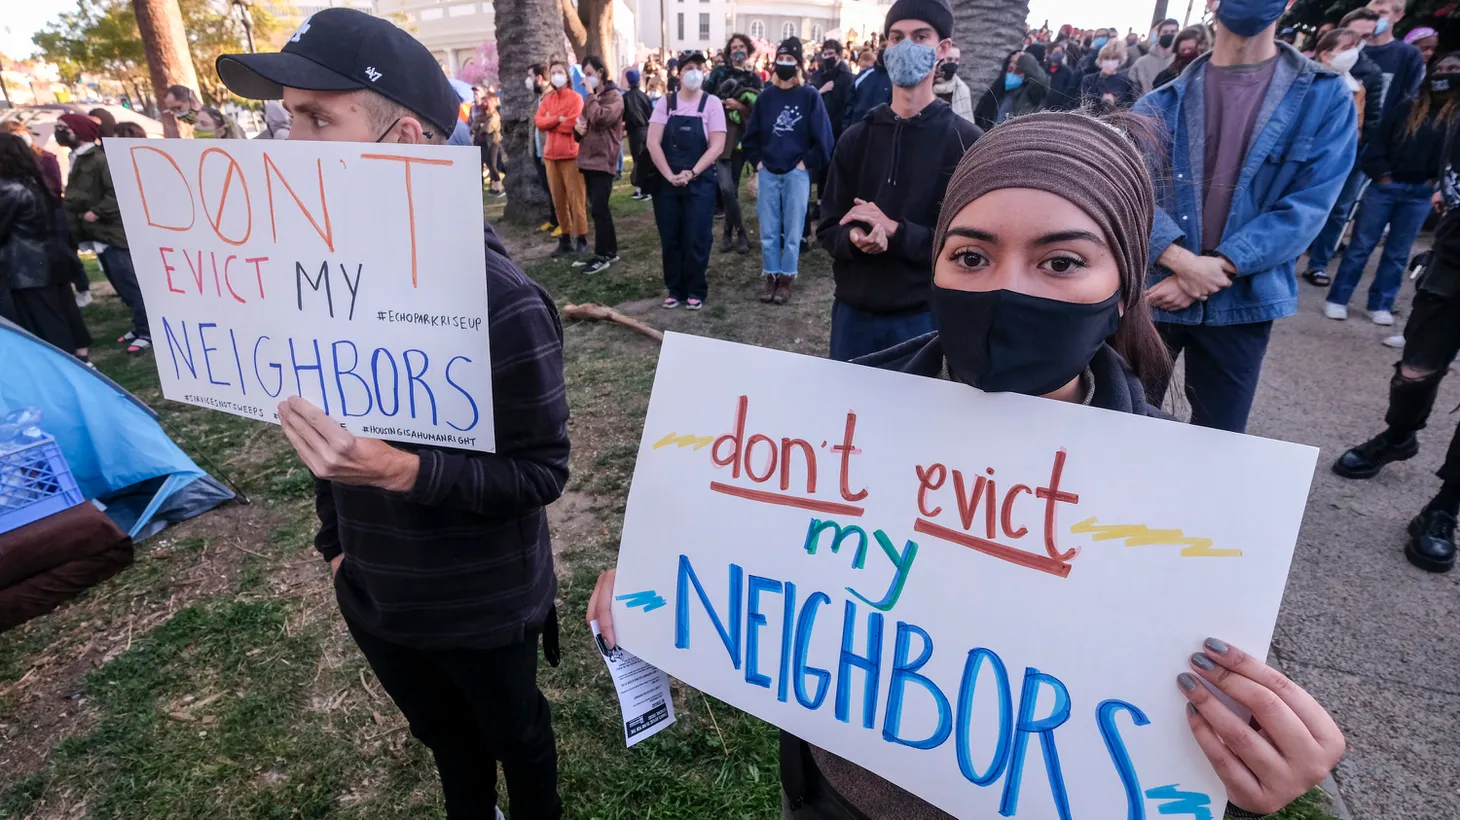 Activists hold signs that say “don’t evict my neighbors,” in Echo Park, Los Angeles, March 24, 2021.